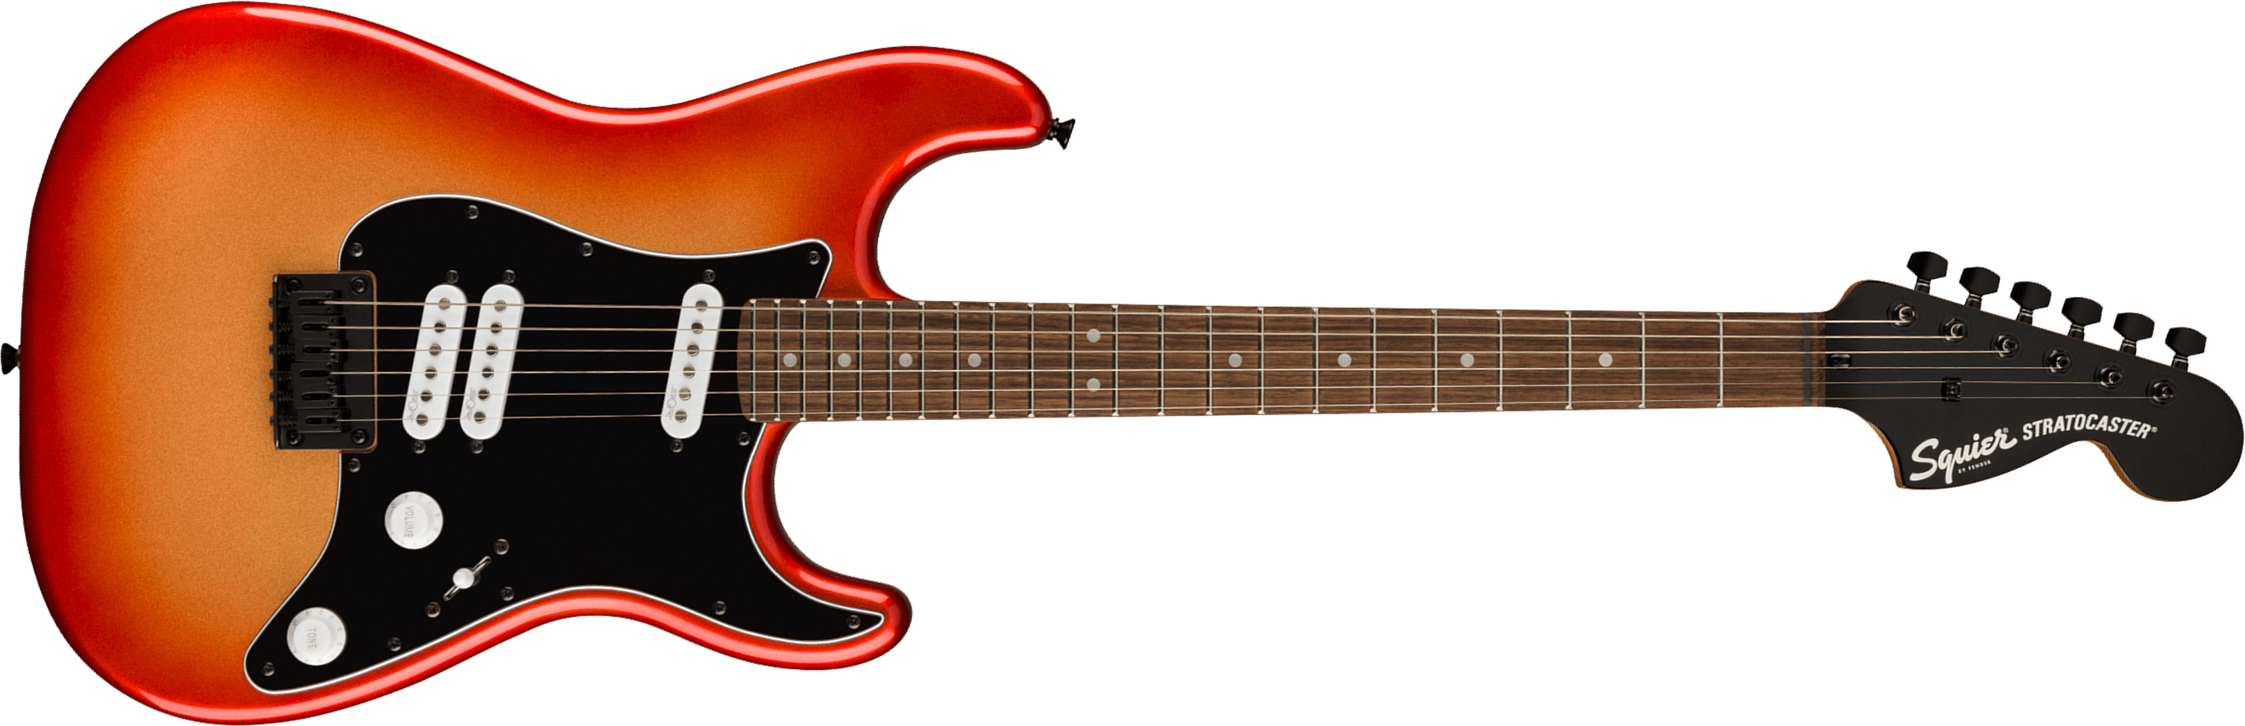 Squier Strat Contemporary Special Ht Sss Lau - Sunset Metallic - E-Gitarre in Str-Form - Main picture